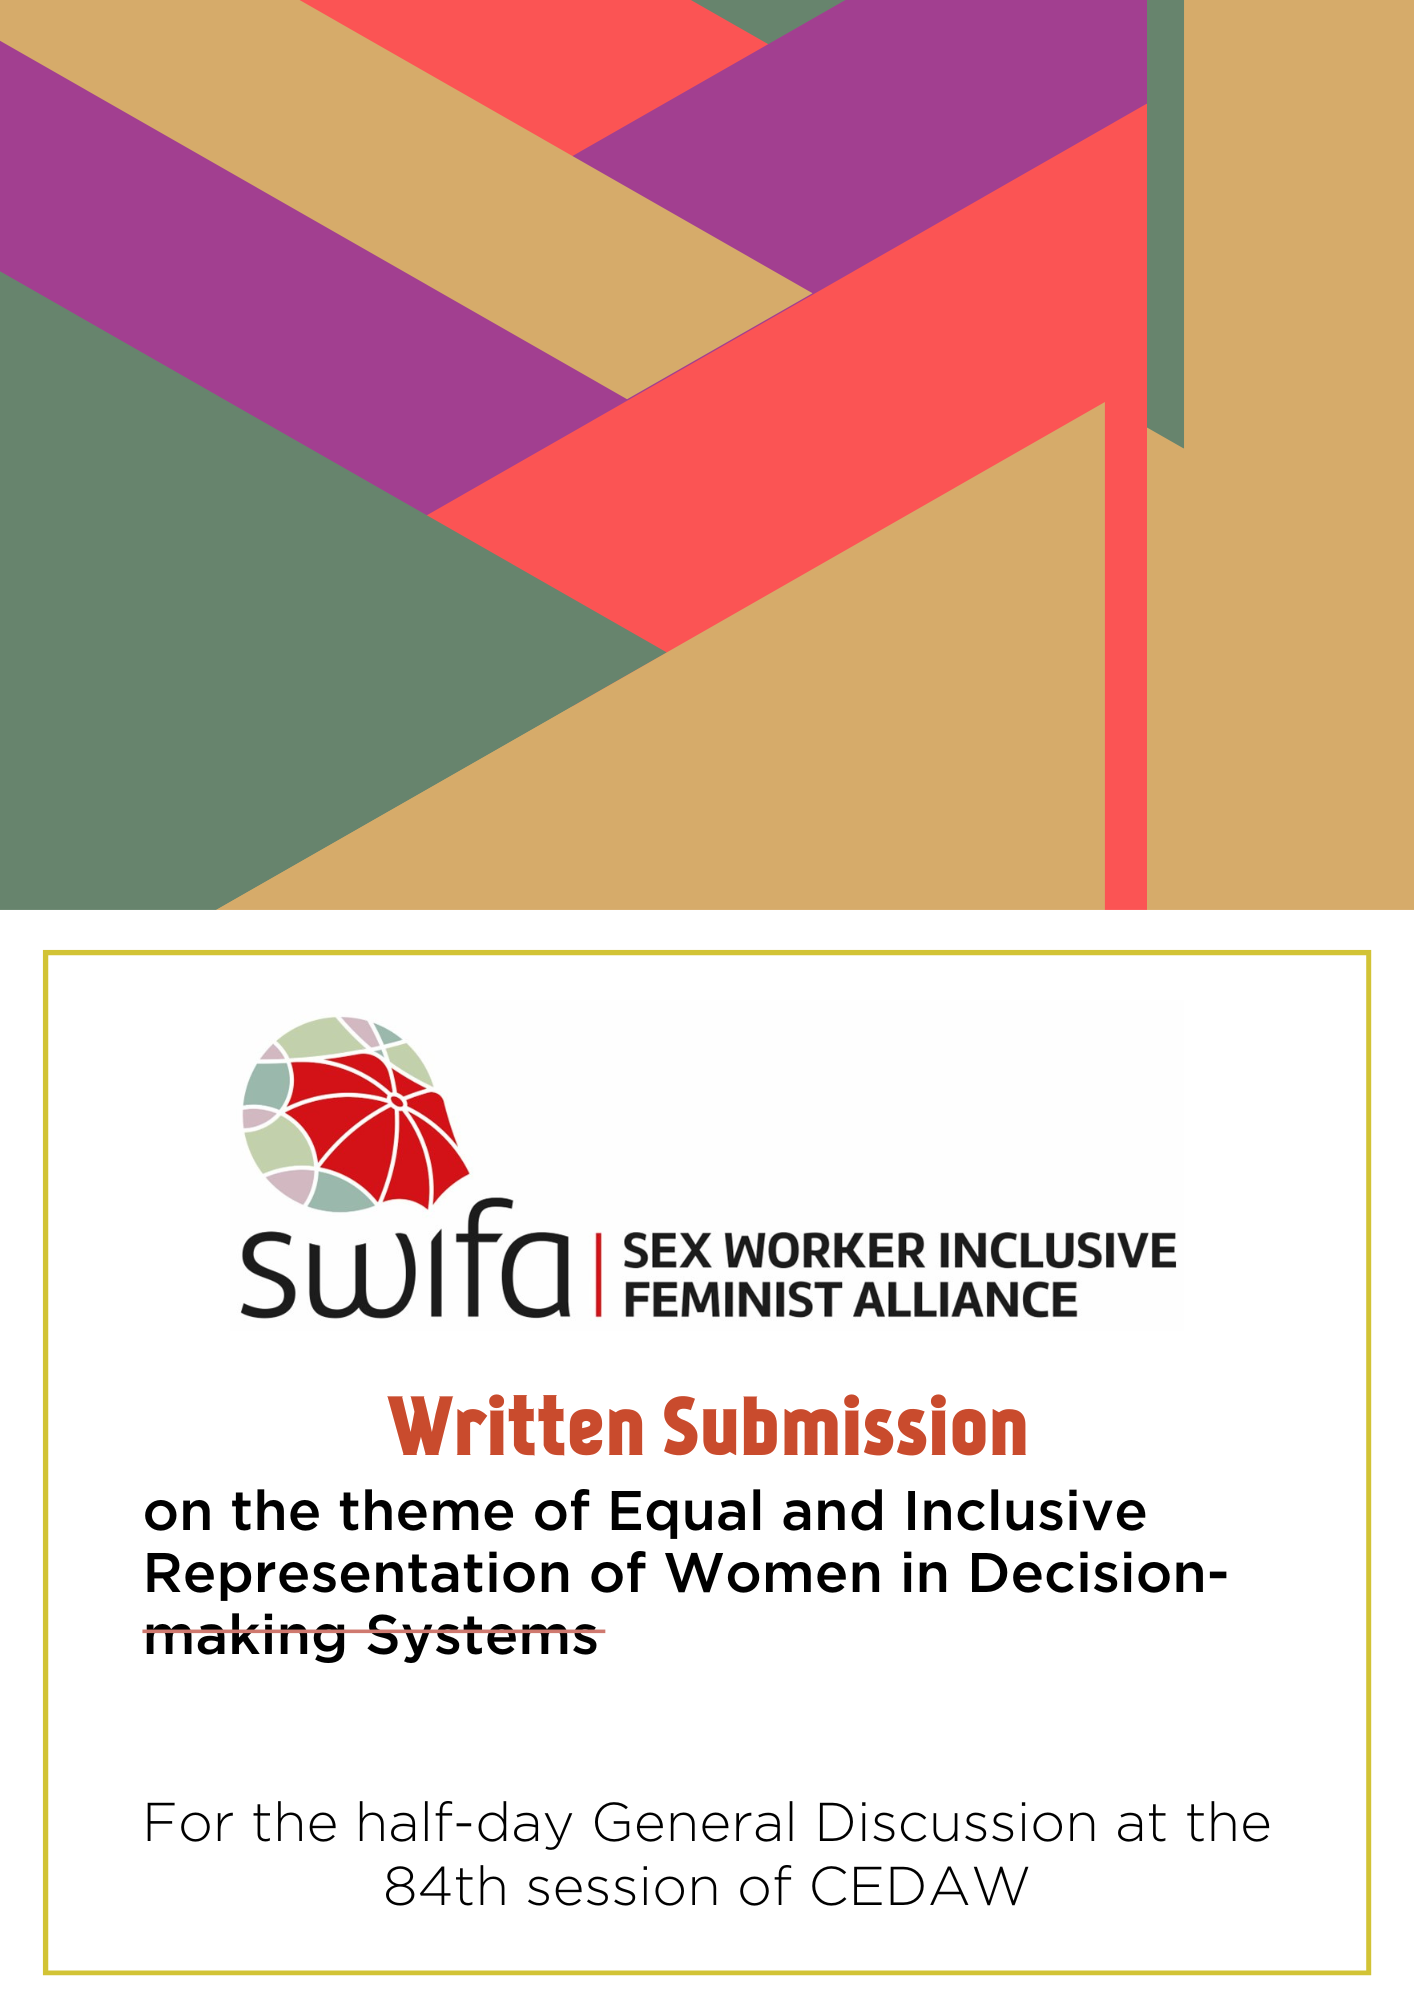 Submission Of The Sex Worker Inclusive Feminist Alliance To Cedaw’s General Discussion On Equal